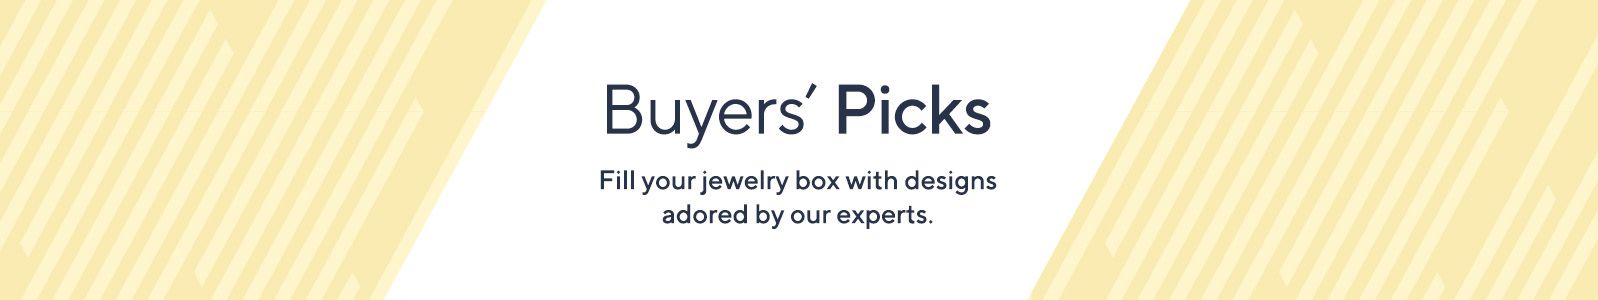 Buyers' Picks. Fill your jewelry box with designs adored by our experts.